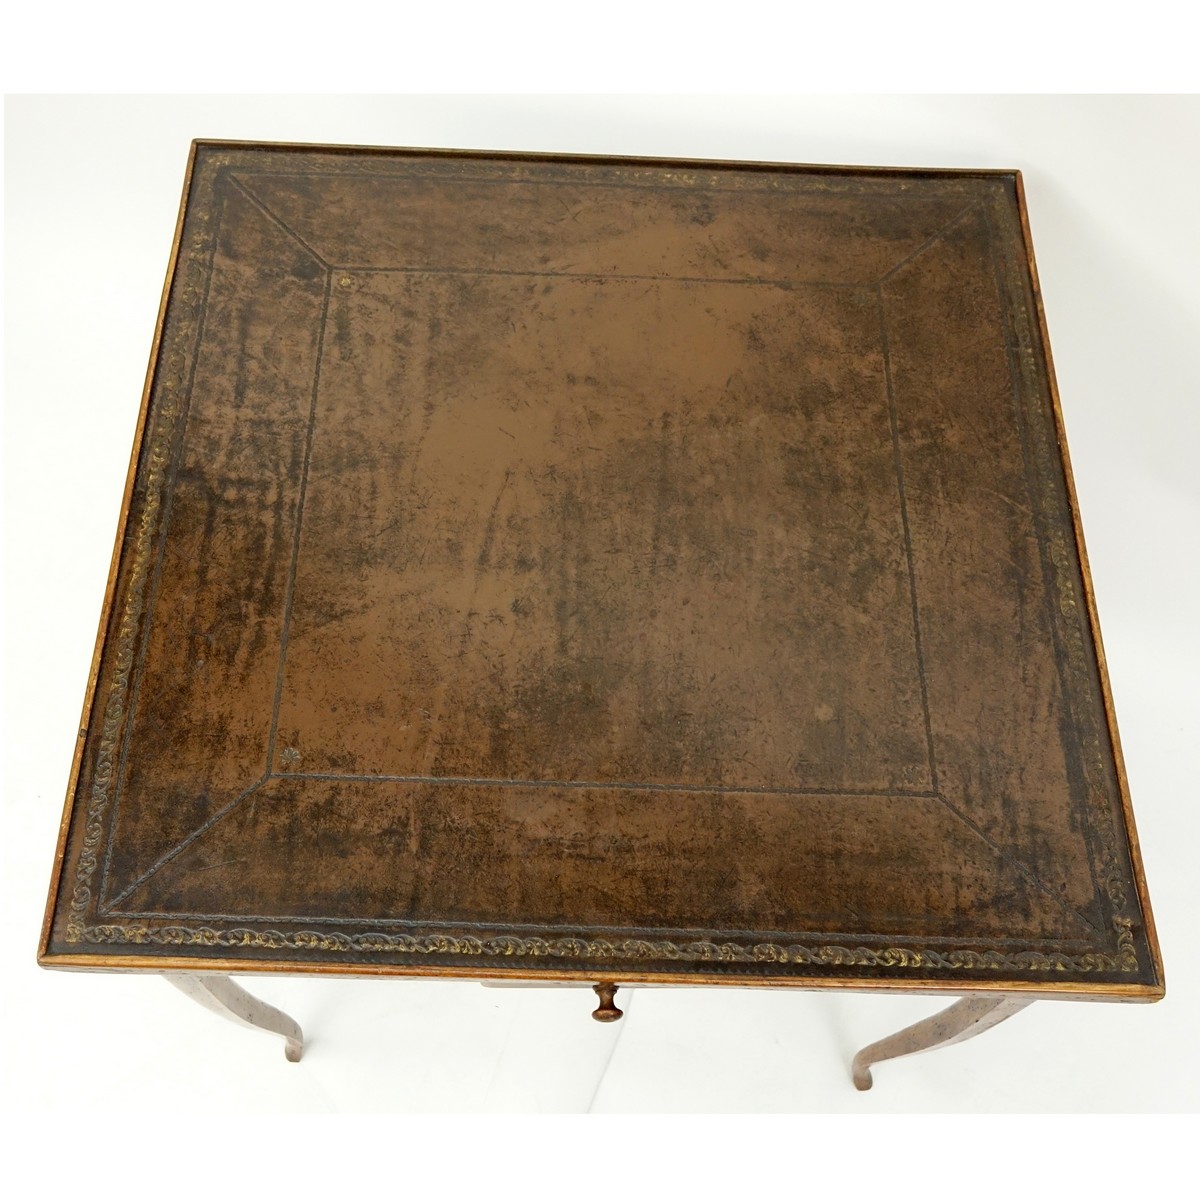 Louis XV Style Game Table with Tooled Leather Top. Four sliding drawers on opposite ends, label attached en verso.